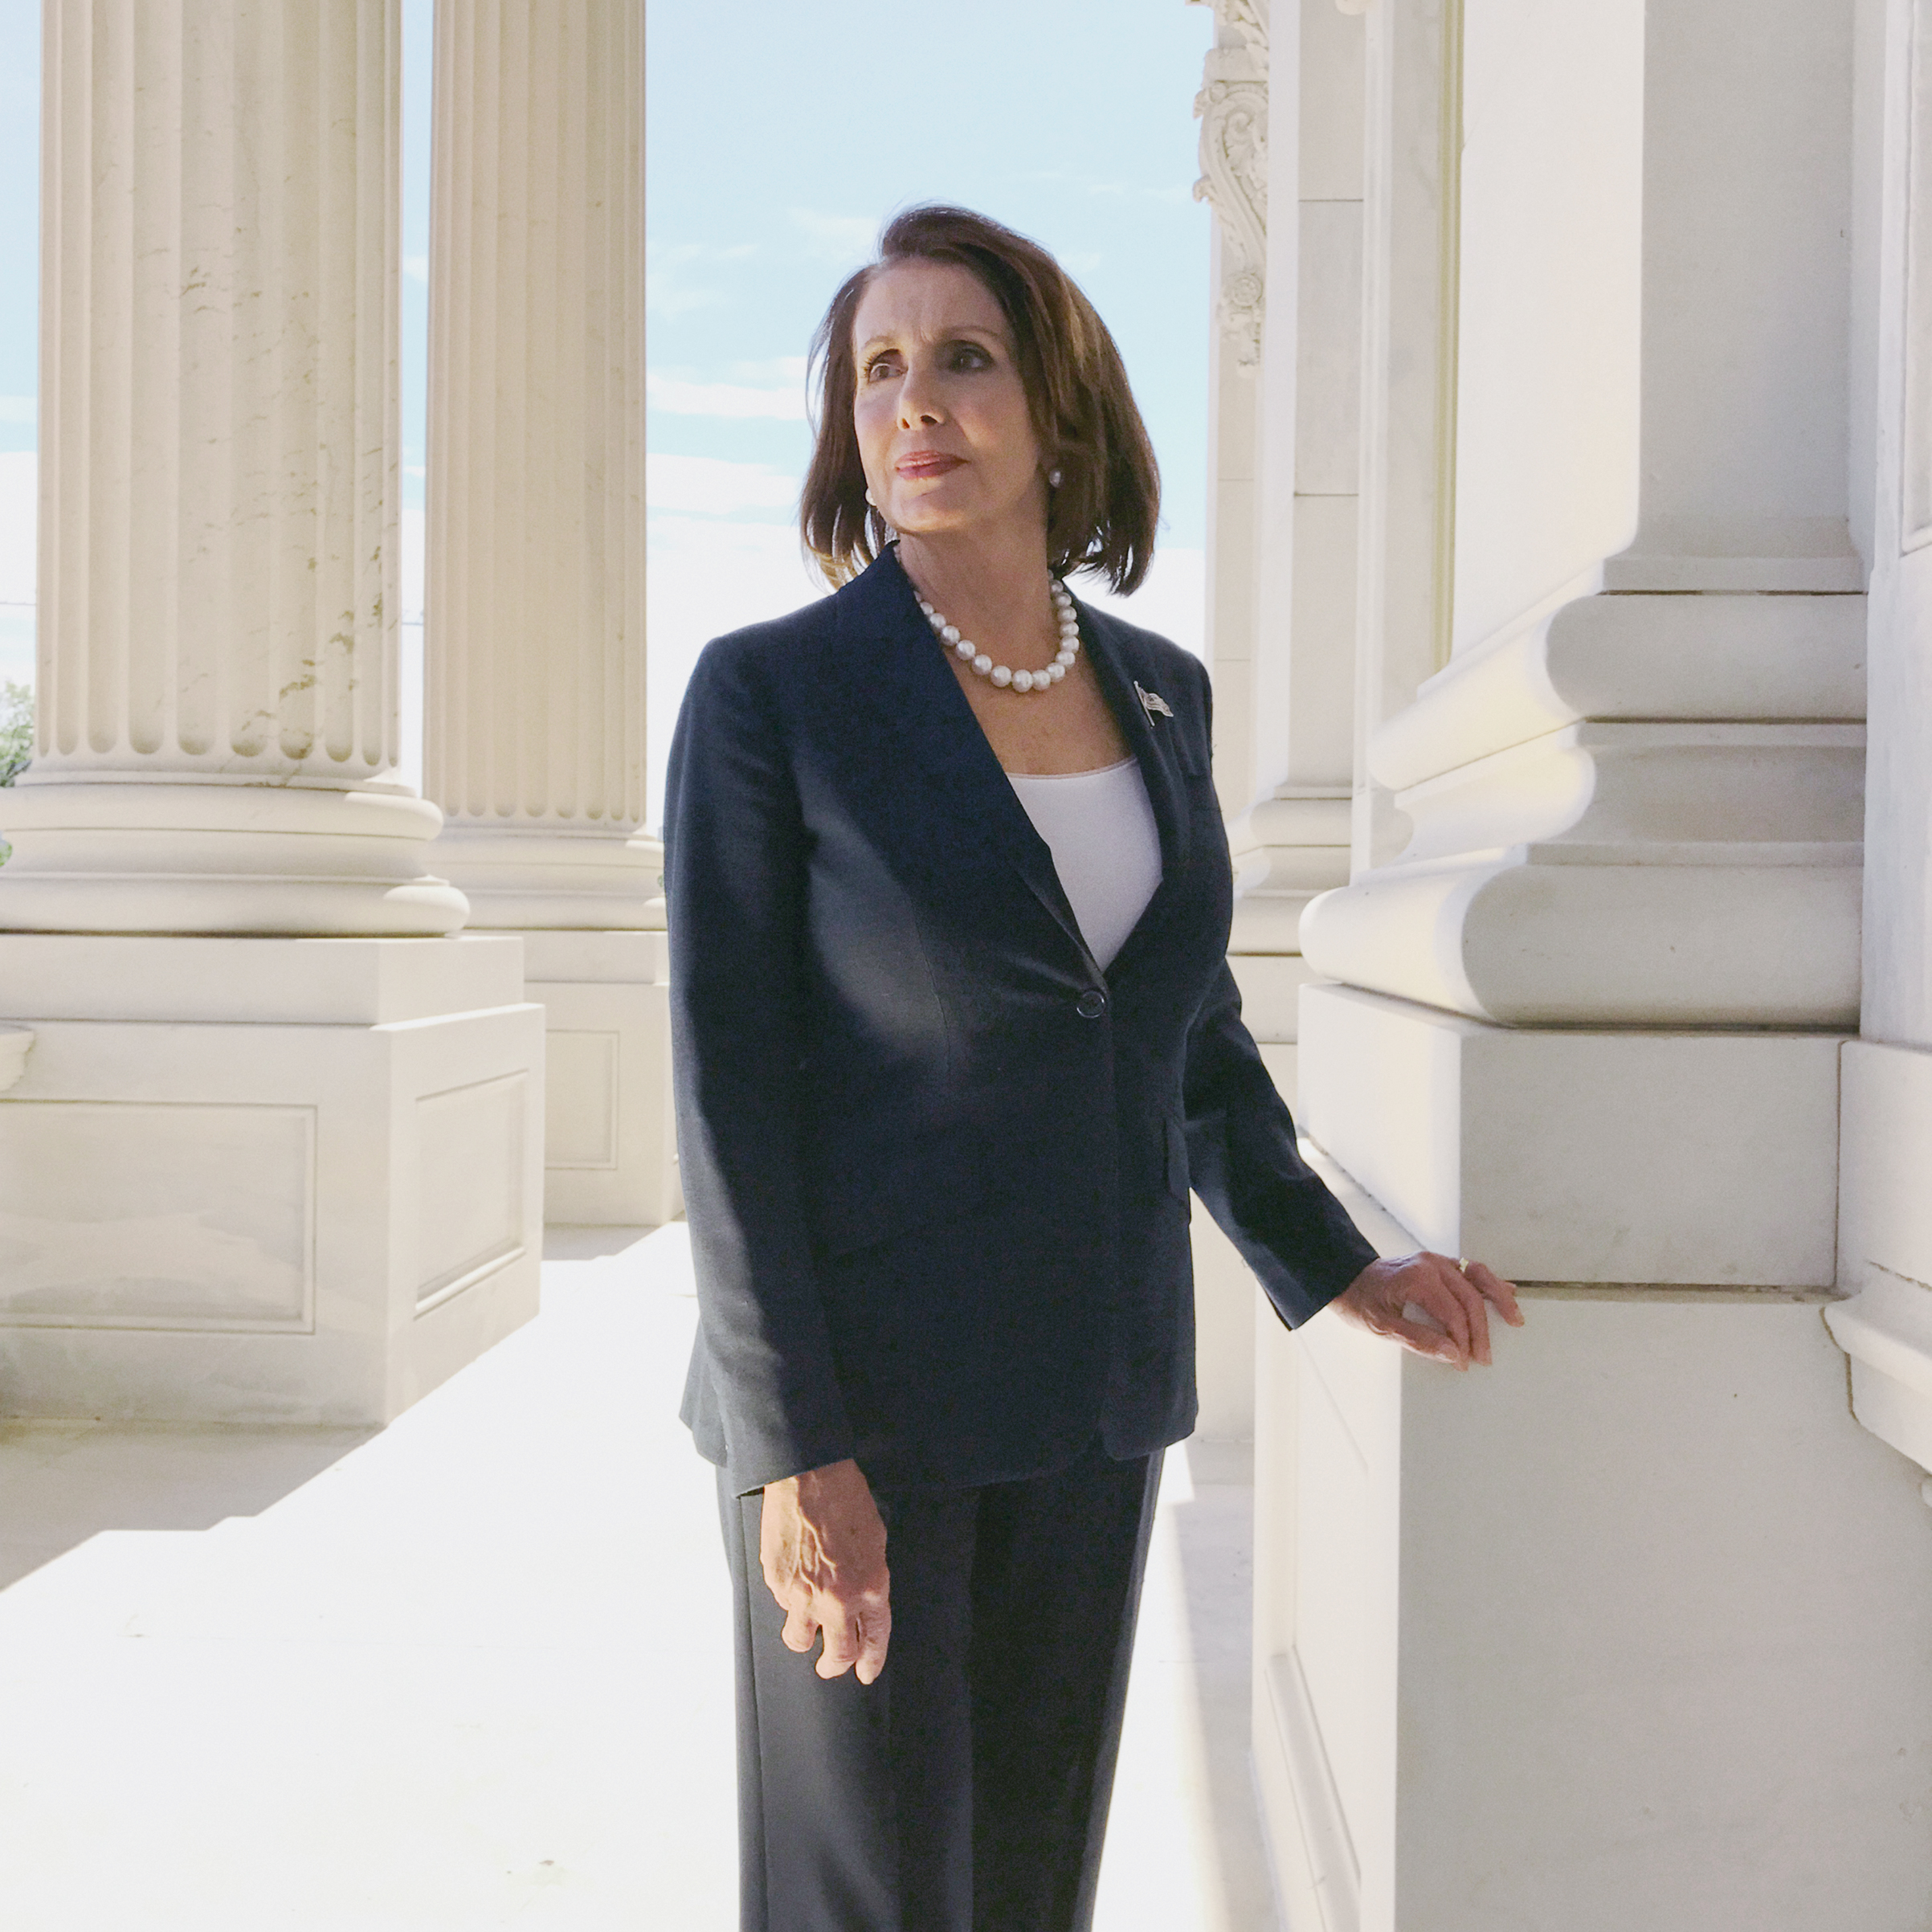 Portrait of Democratic Leader Nancy Pelosi, photographed at The Capitol in Washington, DC, Sept. 22, 2016. (Luisa Dörr for TIME)